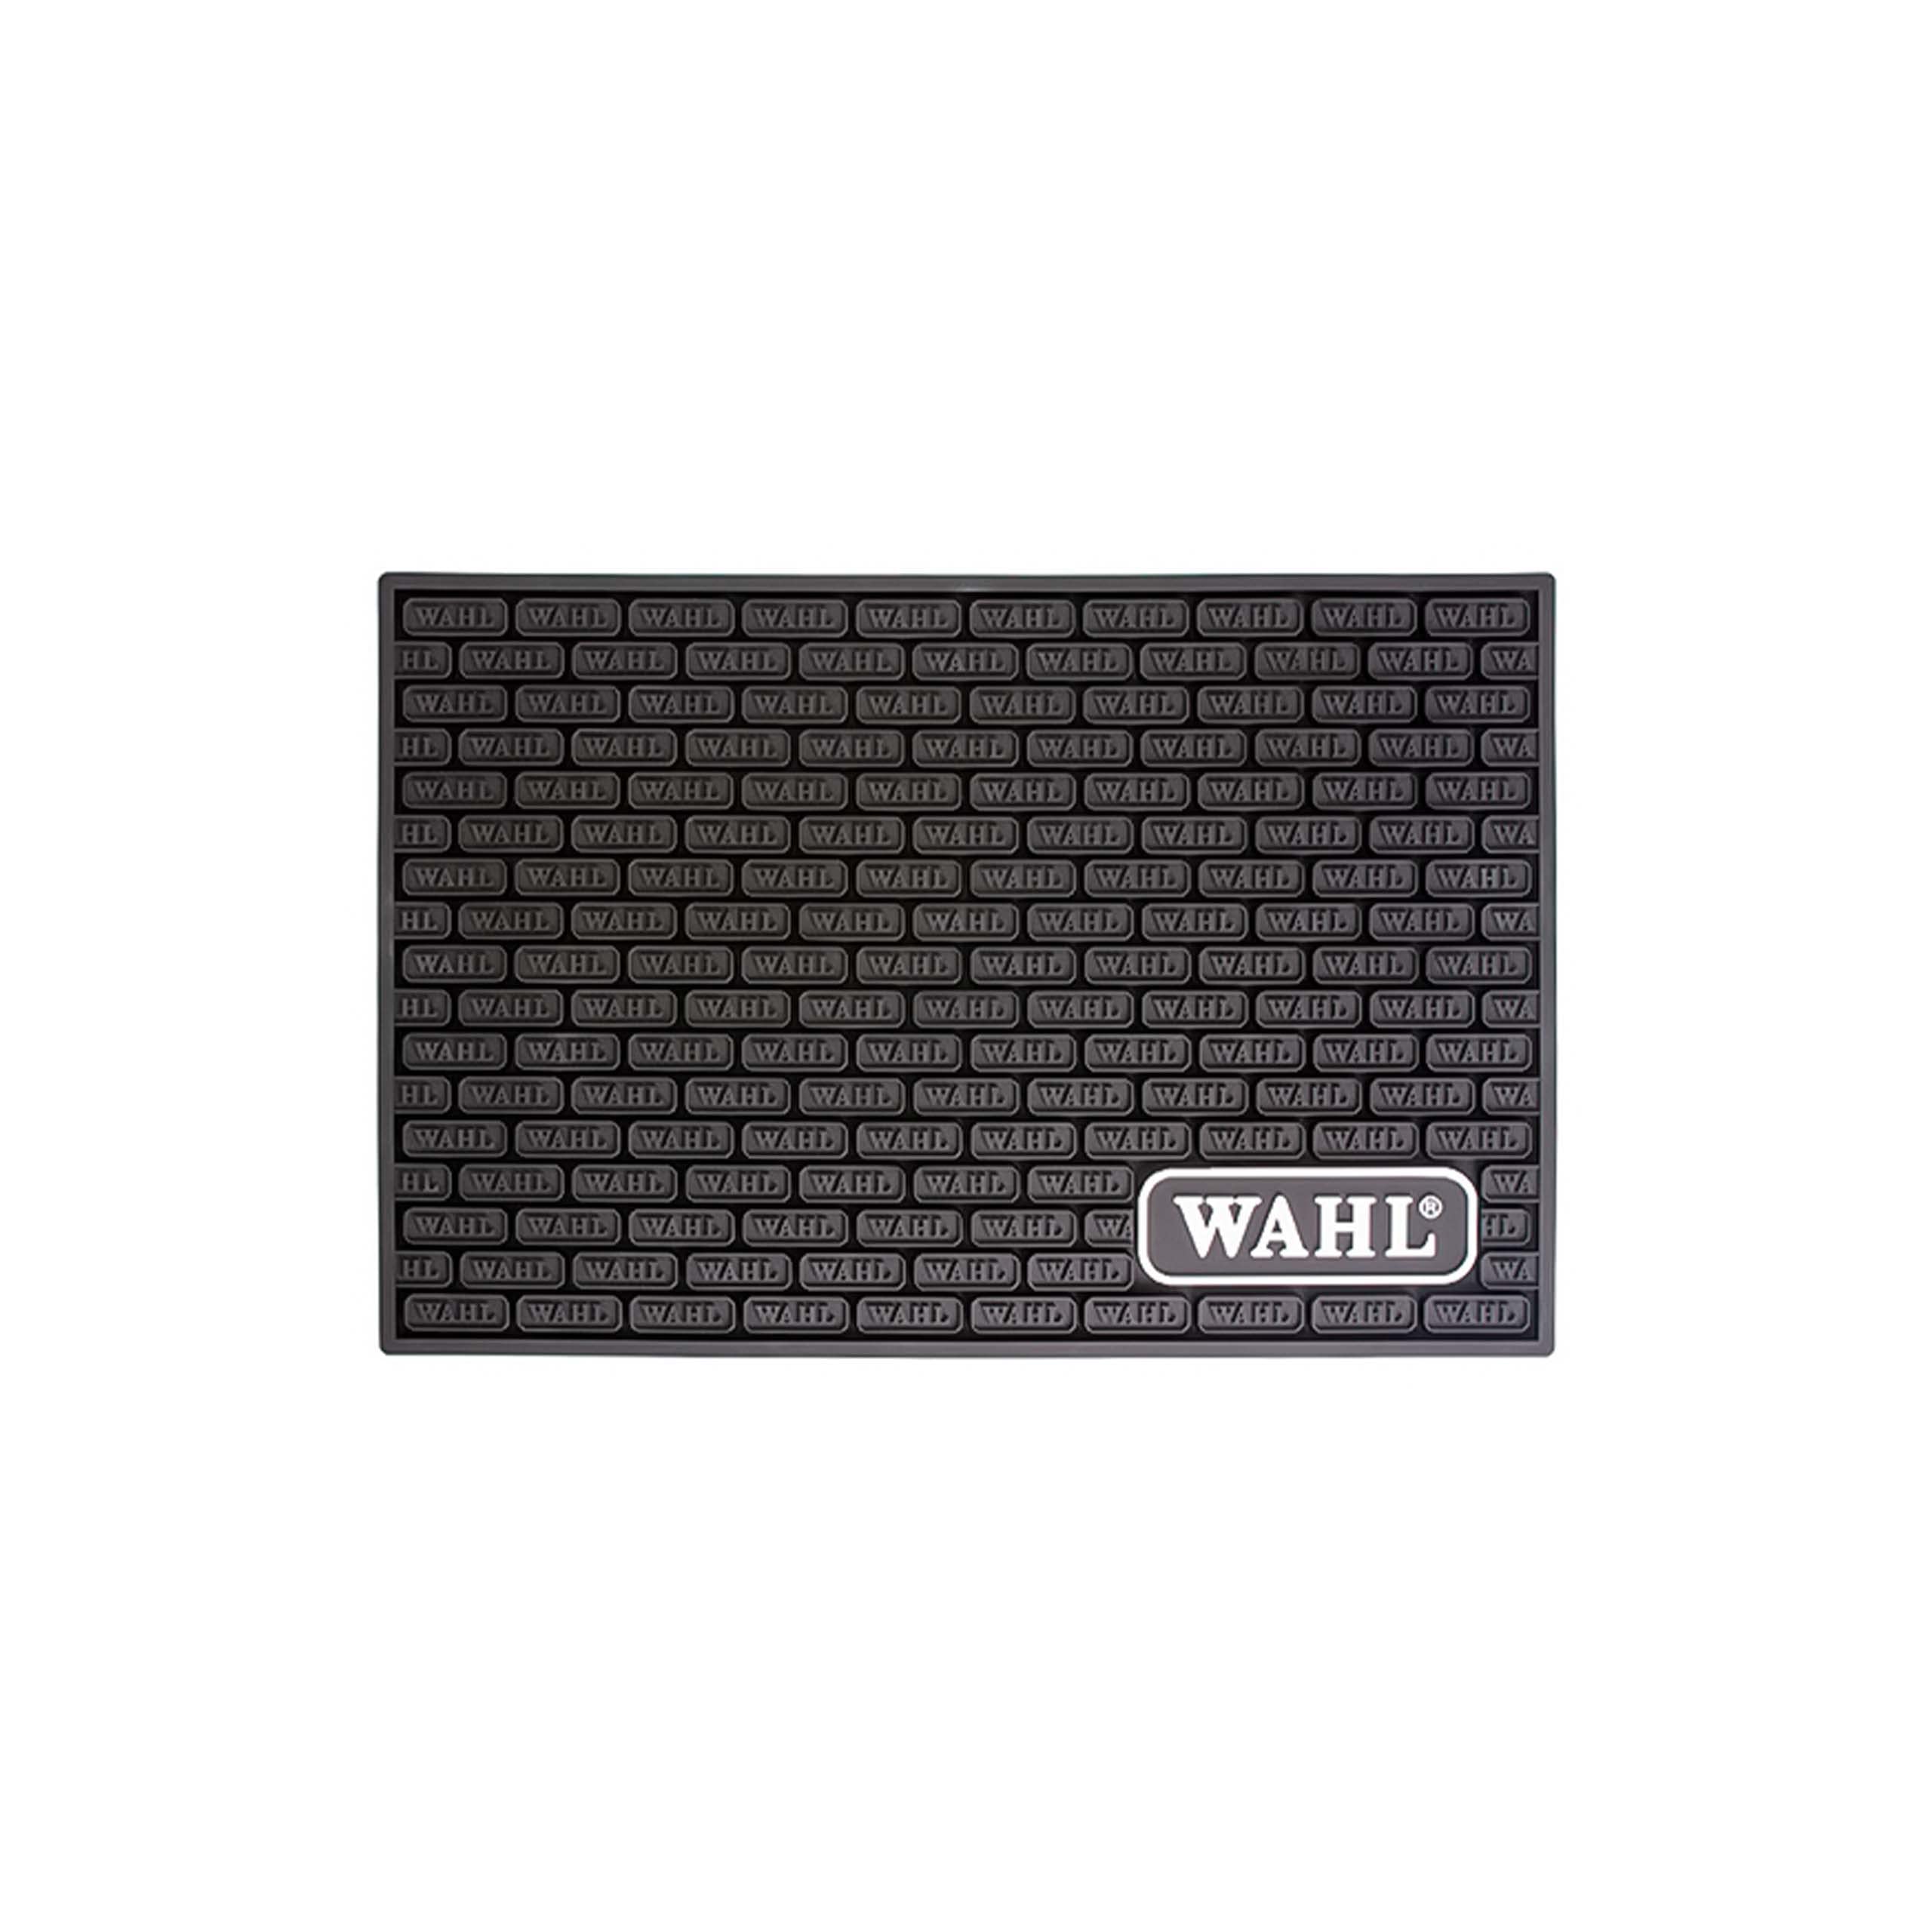 Wahl Professional Beret Cord Cordless Electric Trimmer Tool Mat for Clippers, Trimmers & Haircut Tools Bundle